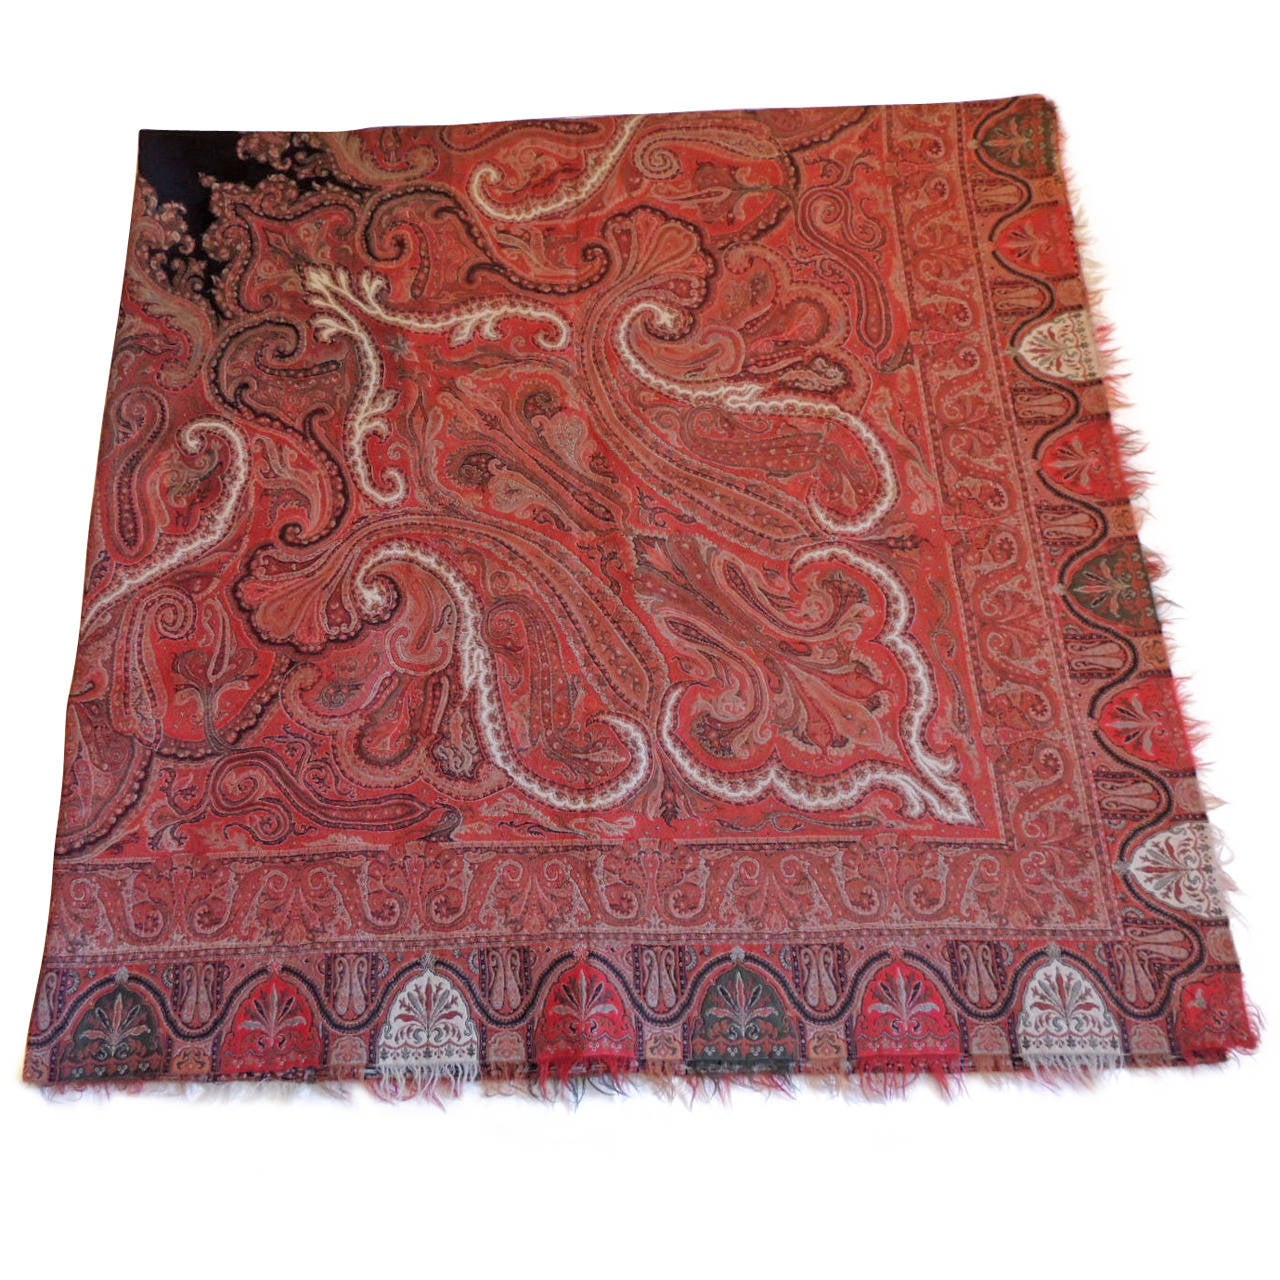 Large Kashmir embroidered paisley coverlet, throw, cloth or shawl with dark wool and backing, boteh border all around. Needlework technique known as Rafugar;
Separately woven and joined to the field, center medallion in dark wool. Predominately in